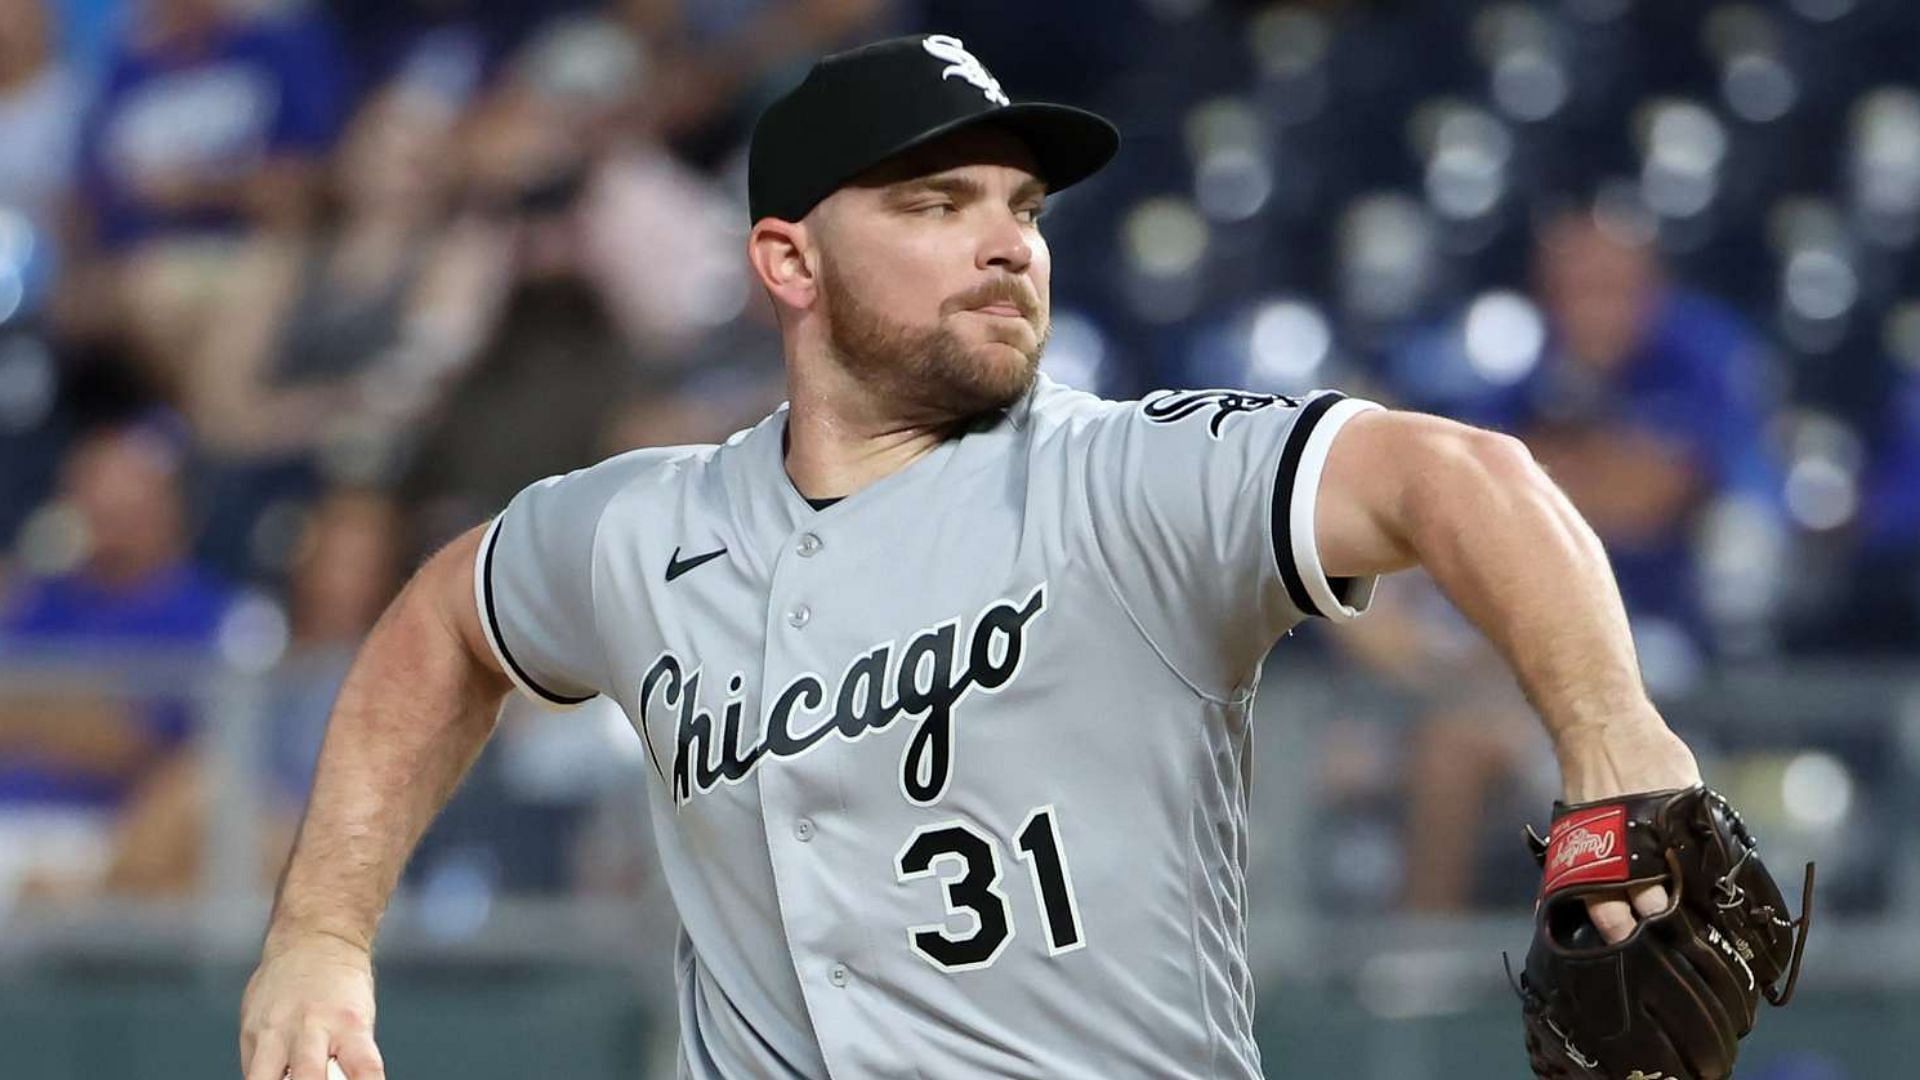 Liam Hendriks, White Sox reliever